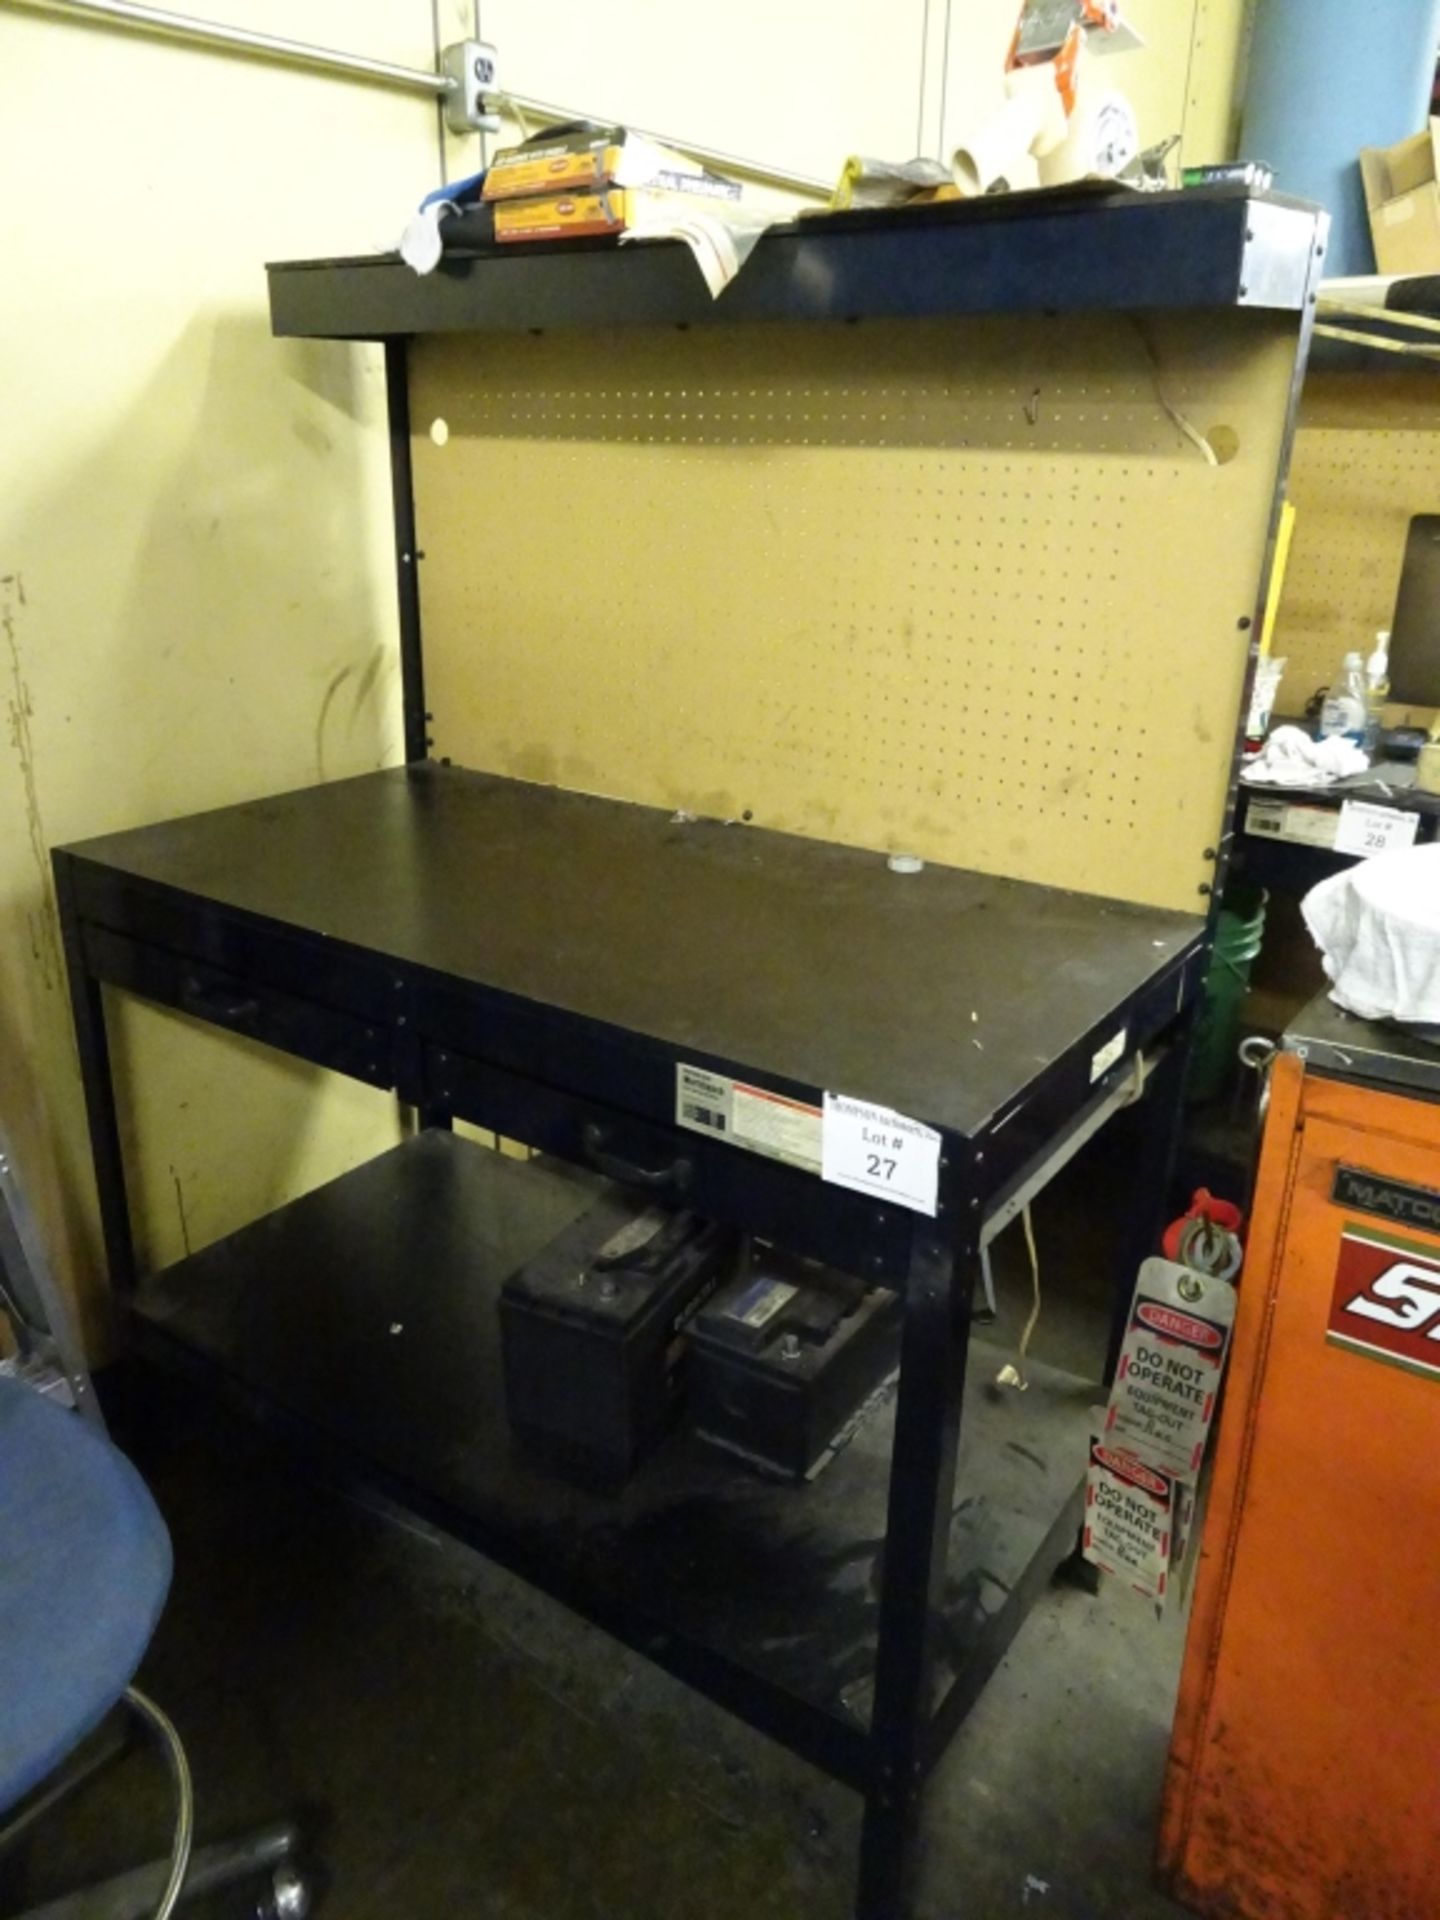 48" x 24" Workbench Model 60723 With Shelving, Drawers, Light, Pegboard - Image 2 of 2